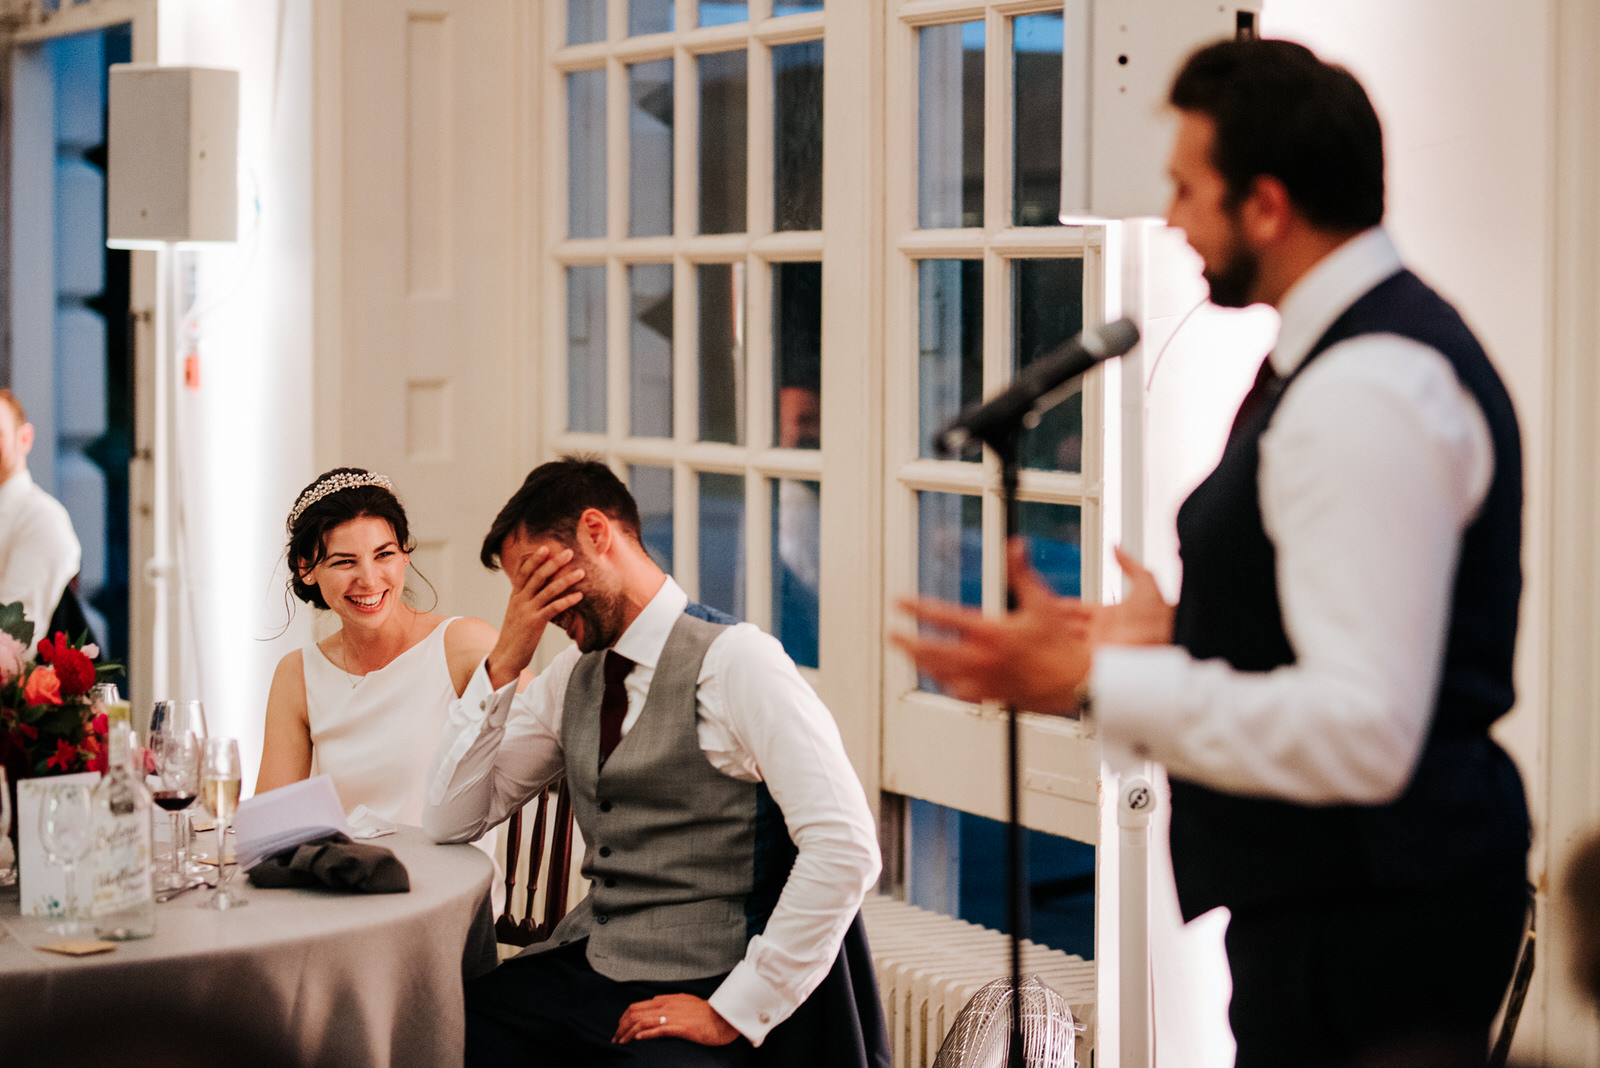  Best man delivers his speech as bride smiles at groom and groom covers his face in embarrasment 